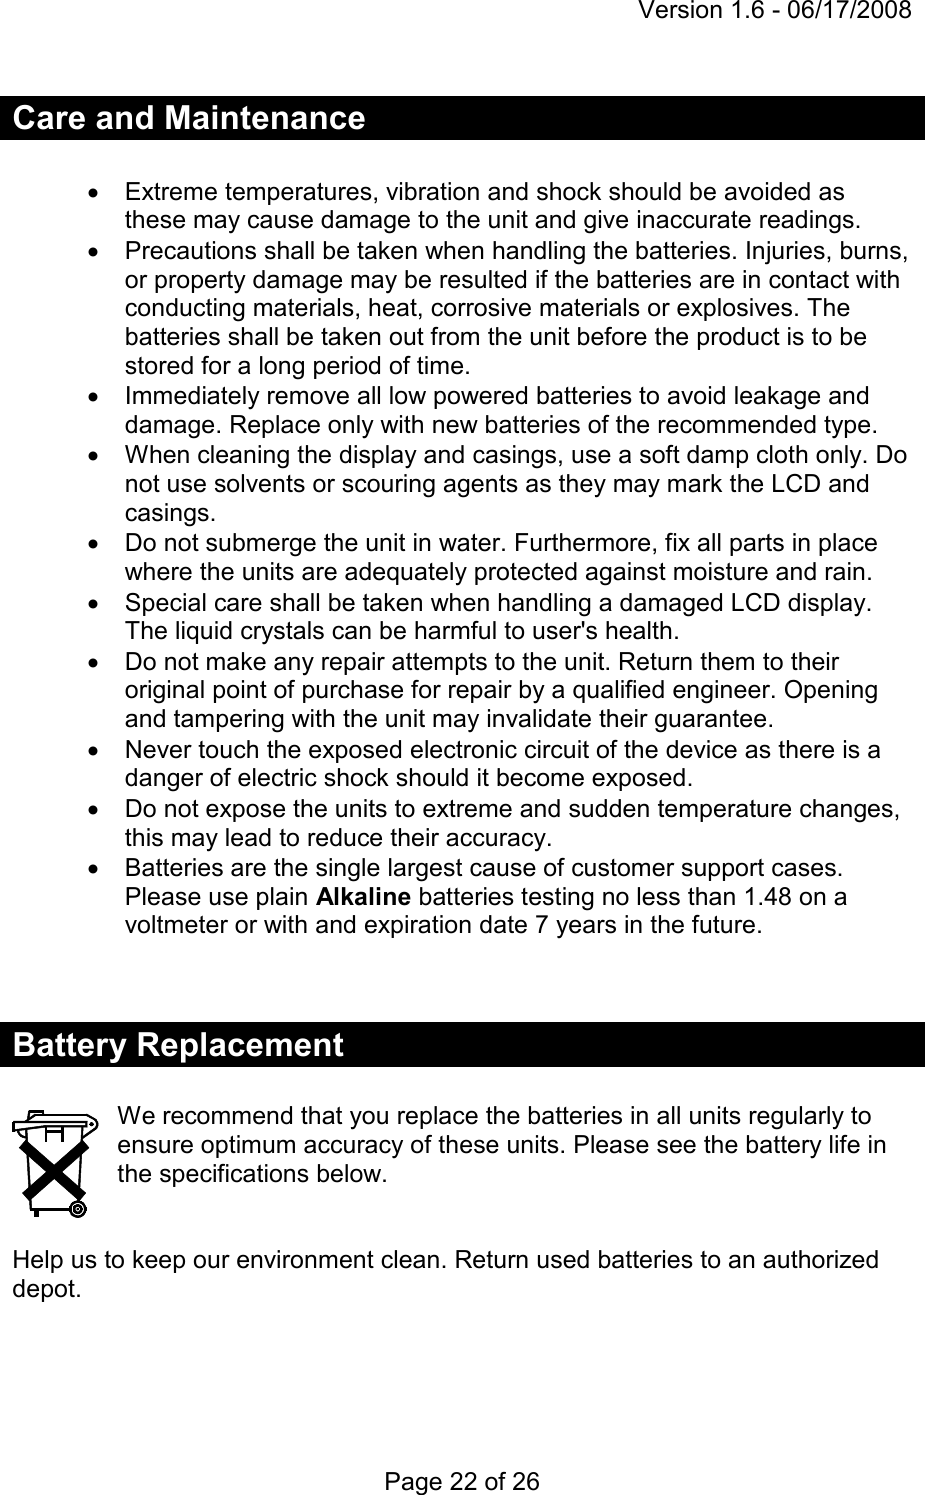 Version 1.6 - 06/17/2008 Page 22 of 26 Care and Maintenance  •  Extreme temperatures, vibration and shock should be avoided as these may cause damage to the unit and give inaccurate readings. •  Precautions shall be taken when handling the batteries. Injuries, burns, or property damage may be resulted if the batteries are in contact with conducting materials, heat, corrosive materials or explosives. The batteries shall be taken out from the unit before the product is to be stored for a long period of time. •  Immediately remove all low powered batteries to avoid leakage and damage. Replace only with new batteries of the recommended type. •  When cleaning the display and casings, use a soft damp cloth only. Do not use solvents or scouring agents as they may mark the LCD and casings. •  Do not submerge the unit in water. Furthermore, fix all parts in place where the units are adequately protected against moisture and rain. •  Special care shall be taken when handling a damaged LCD display. The liquid crystals can be harmful to user&apos;s health. •  Do not make any repair attempts to the unit. Return them to their original point of purchase for repair by a qualified engineer. Opening and tampering with the unit may invalidate their guarantee. •  Never touch the exposed electronic circuit of the device as there is a danger of electric shock should it become exposed. •  Do not expose the units to extreme and sudden temperature changes, this may lead to reduce their accuracy. •  Batteries are the single largest cause of customer support cases. Please use plain Alkaline batteries testing no less than 1.48 on a voltmeter or with and expiration date 7 years in the future.   Battery Replacement  We recommend that you replace the batteries in all units regularly to ensure optimum accuracy of these units. Please see the battery life in the specifications below.   Help us to keep our environment clean. Return used batteries to an authorized depot.   